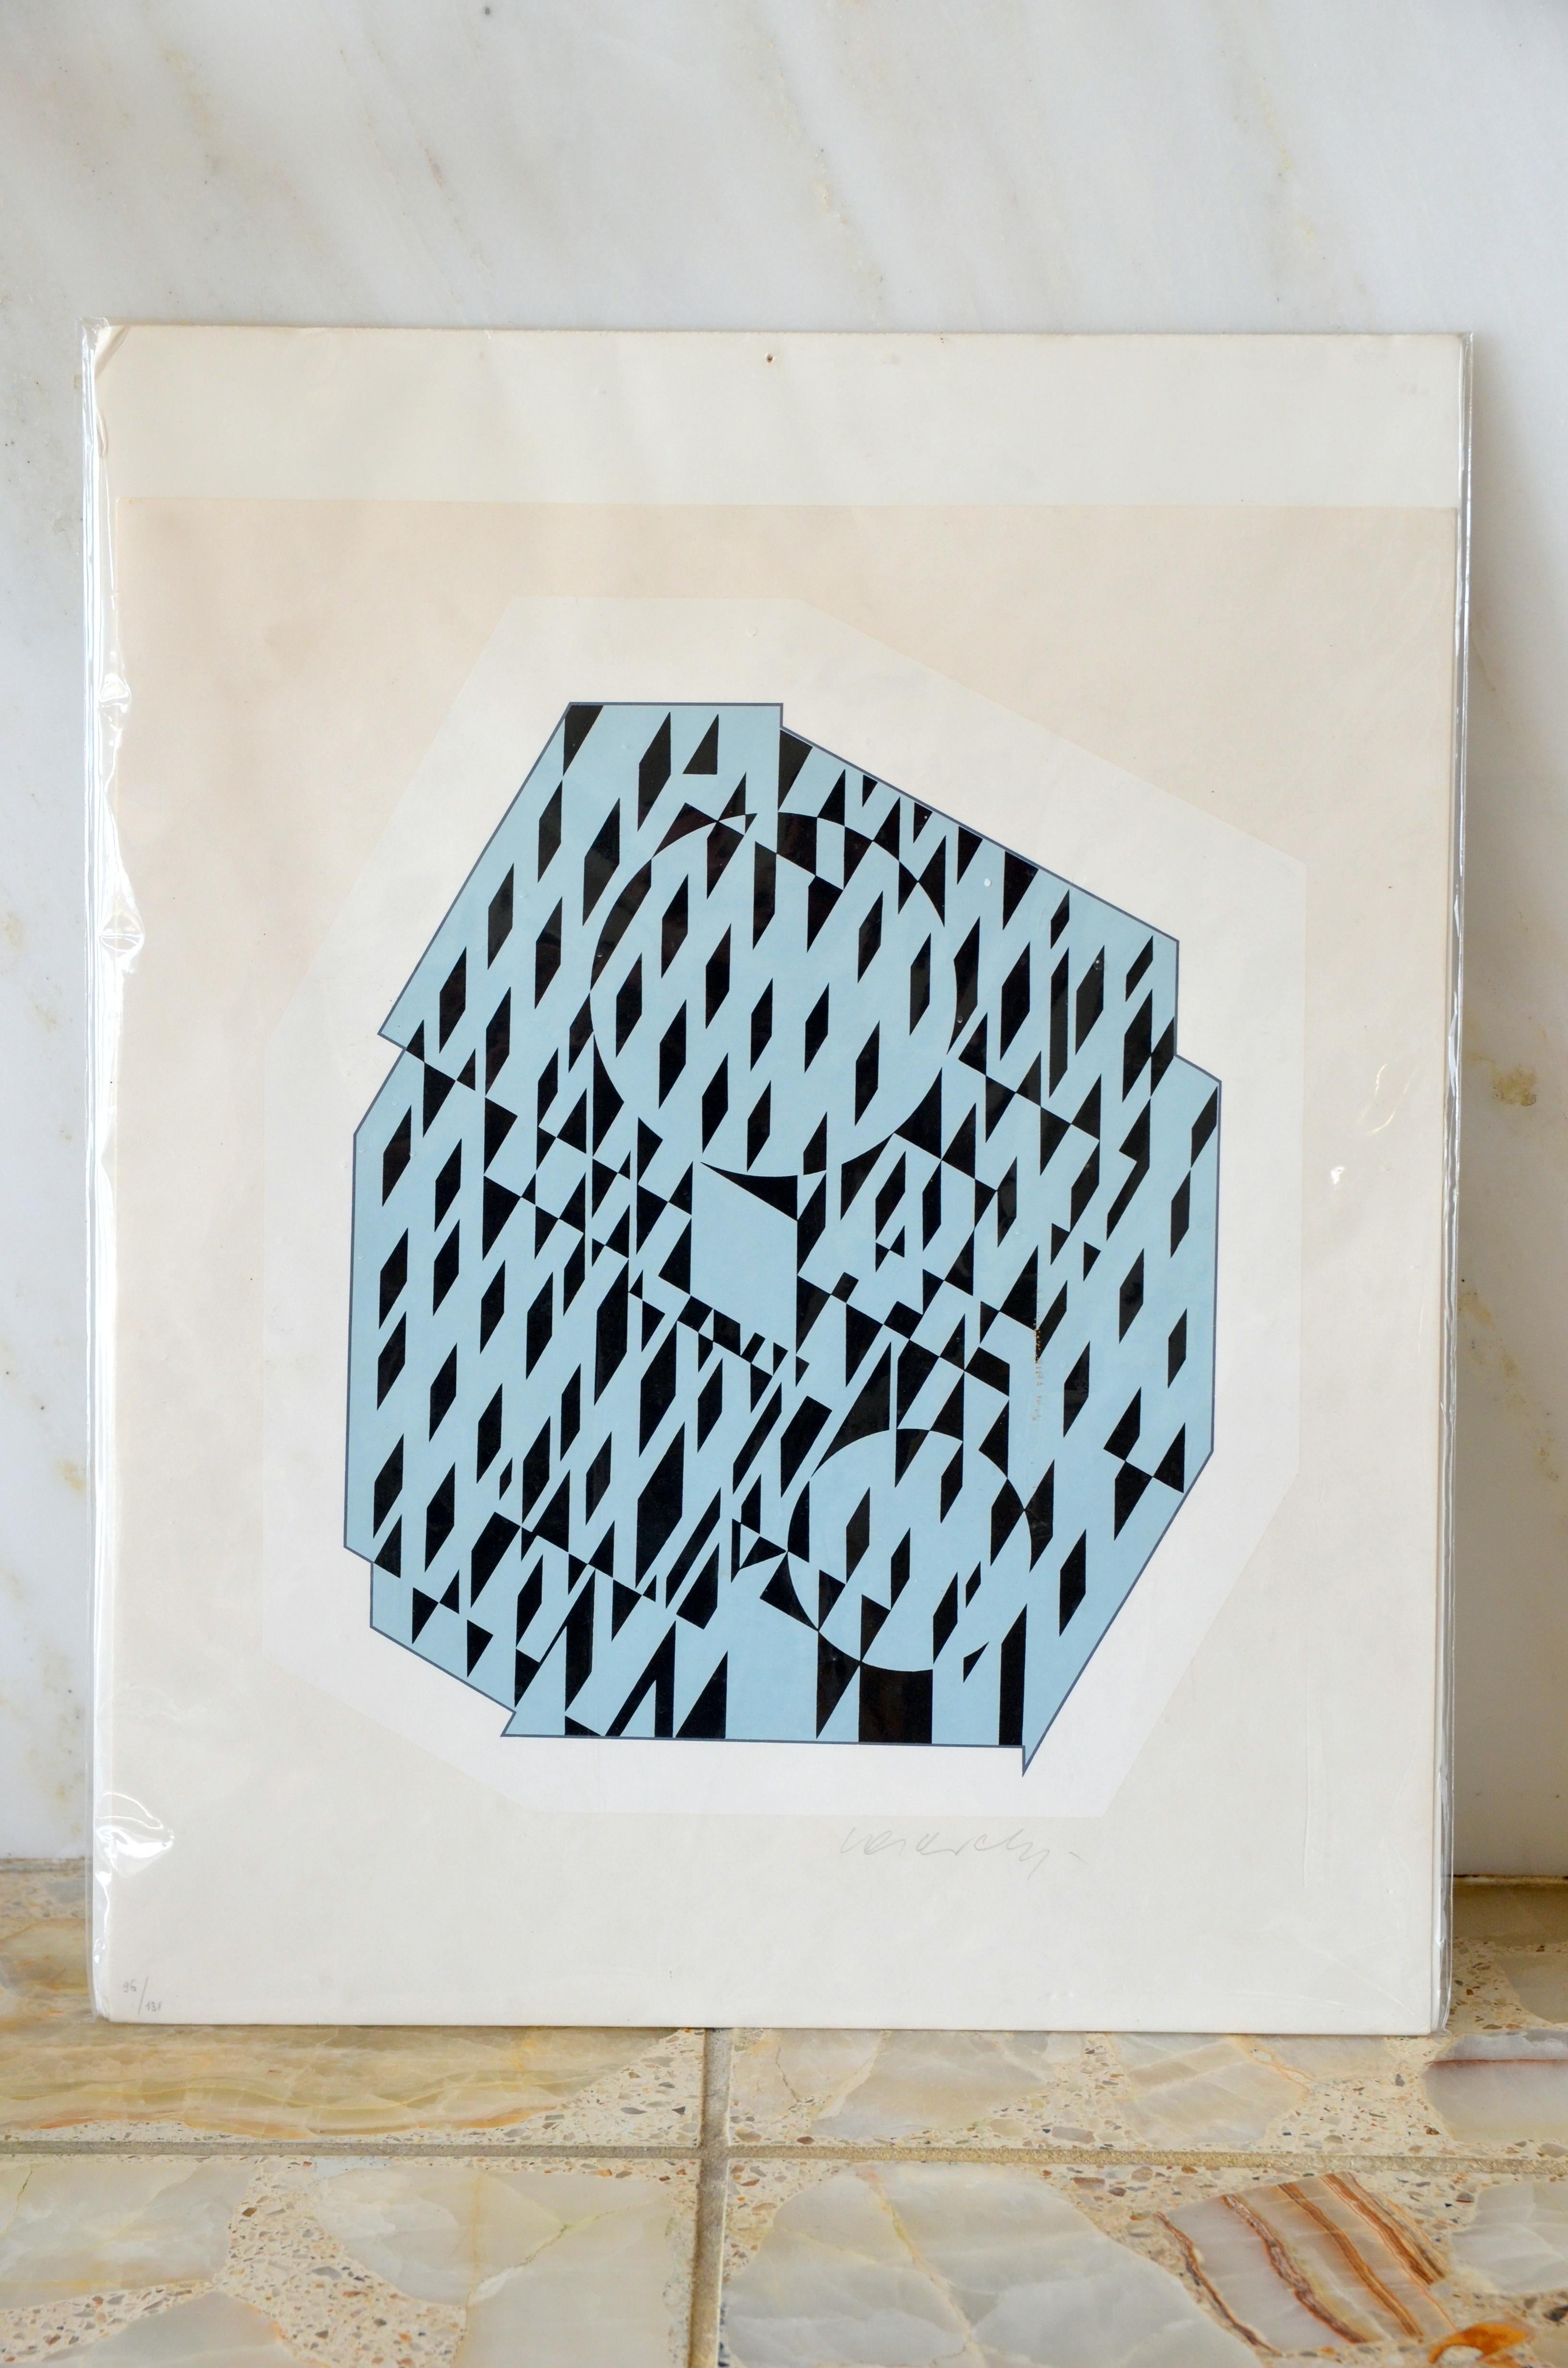 Paper Nethe, Signed and Numbered Silkscreen Print by Victor Vasarely